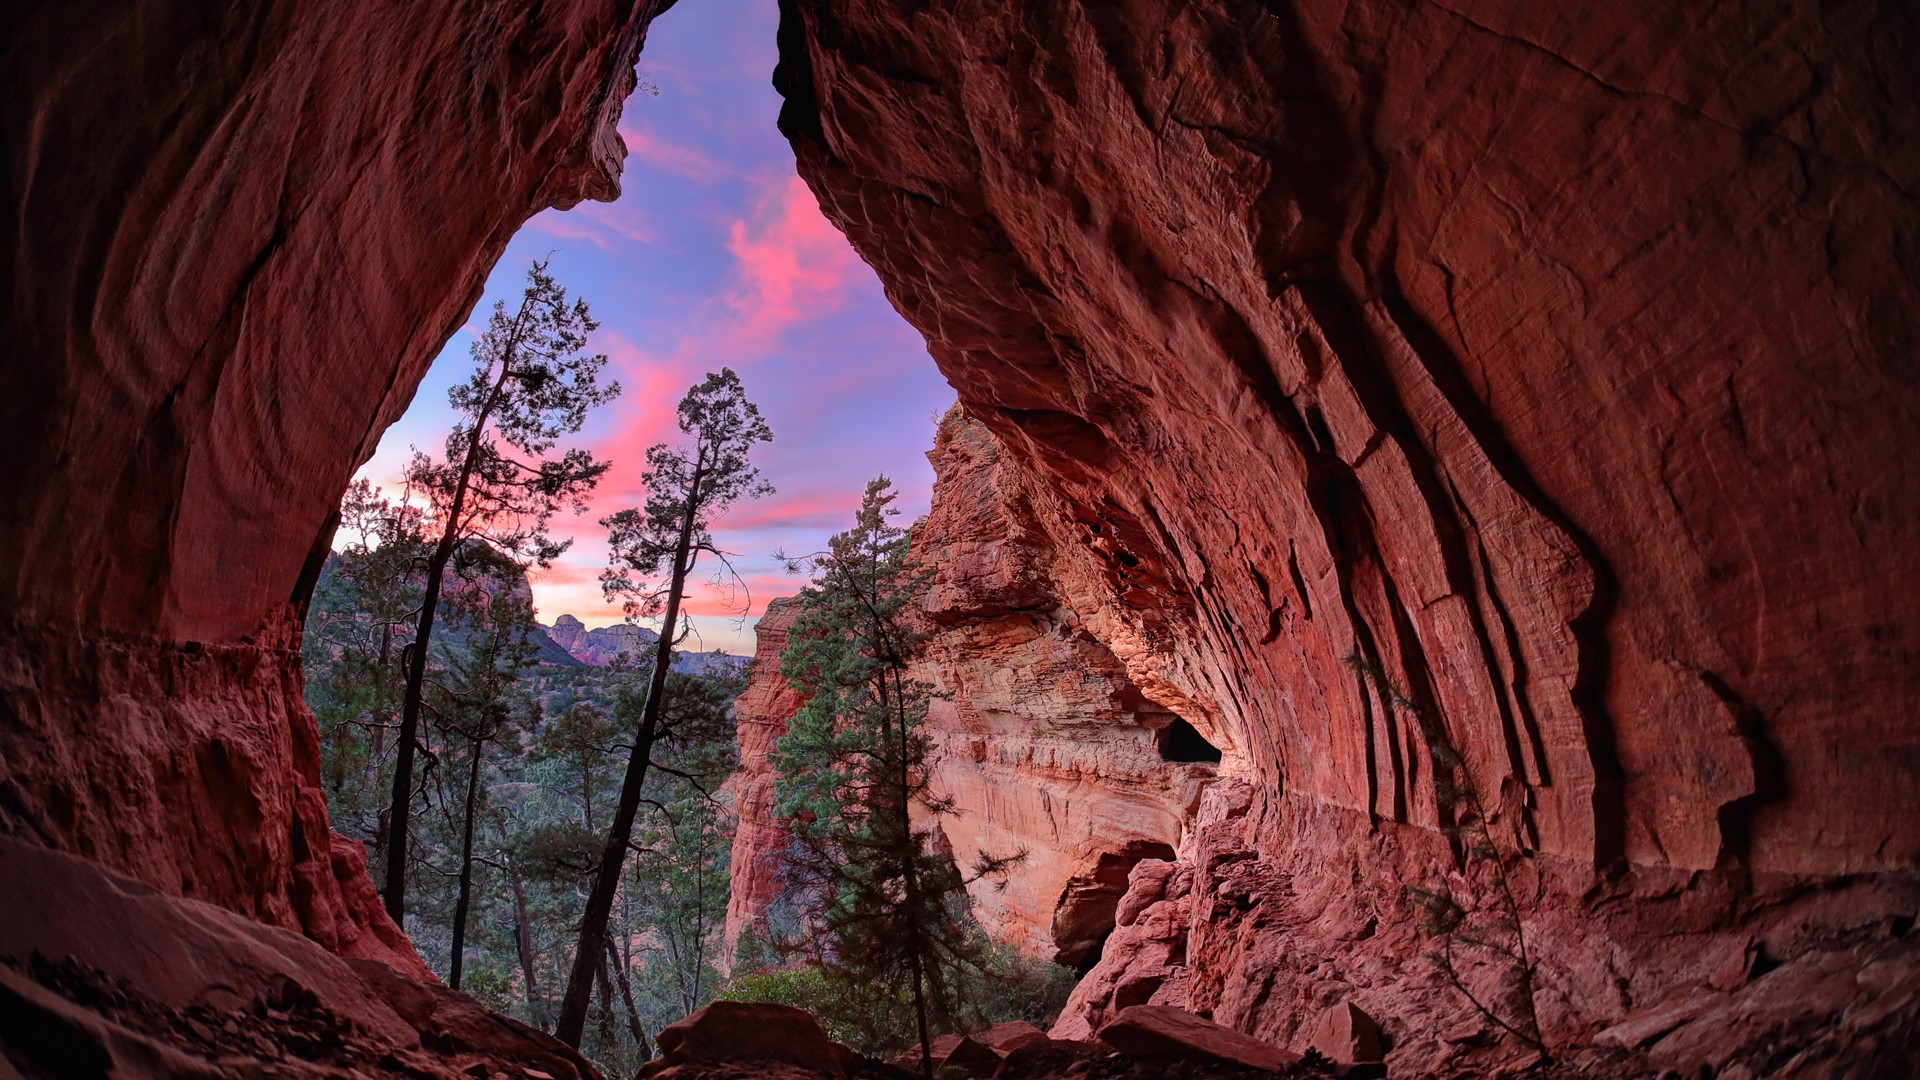 Trees and sky seen through cave at sunset, Red Rock State Park, Sedona ...